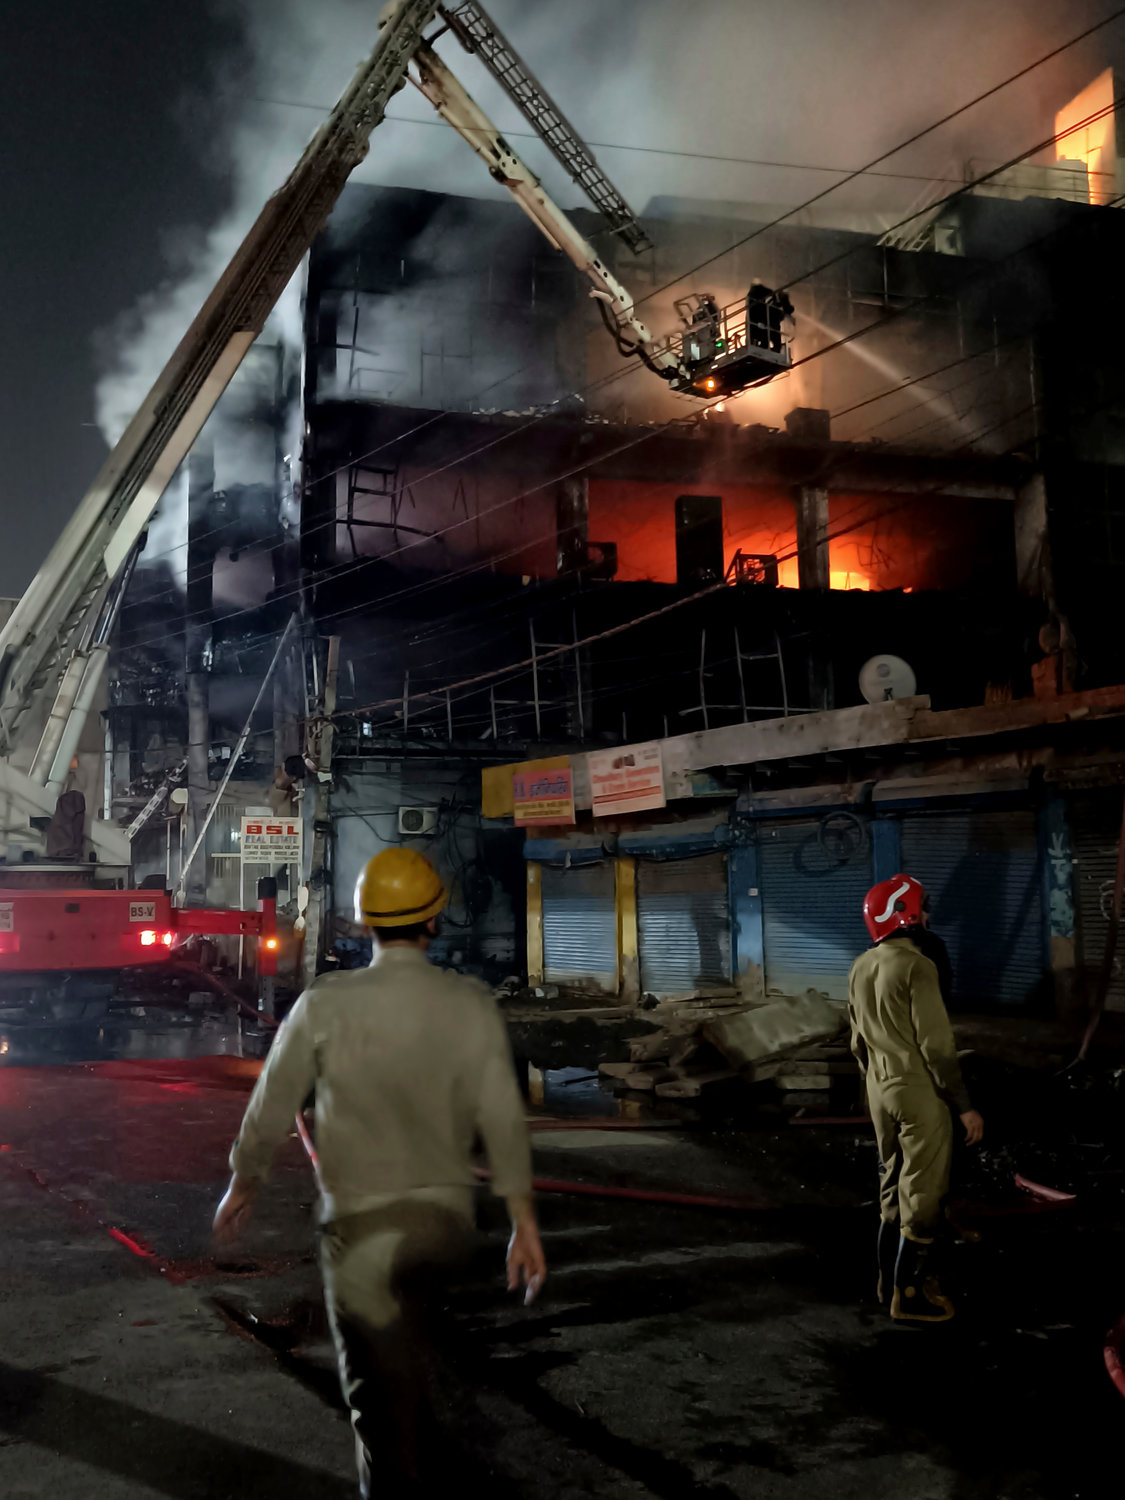 Fire officials try to douse a fire in a four storied building, in New Delhi, India, Friday, May 13, 2022. A massive fire erupted in a four-storied building in the Indian capital on Friday, killing at least 19 people and leaving several injured, the fire control room said. Dozens of people have been rescued from the commercial building, mainly shops, in the Mundka area in the western part of New Delhi. (AP Photo/Dinesh Joshi)